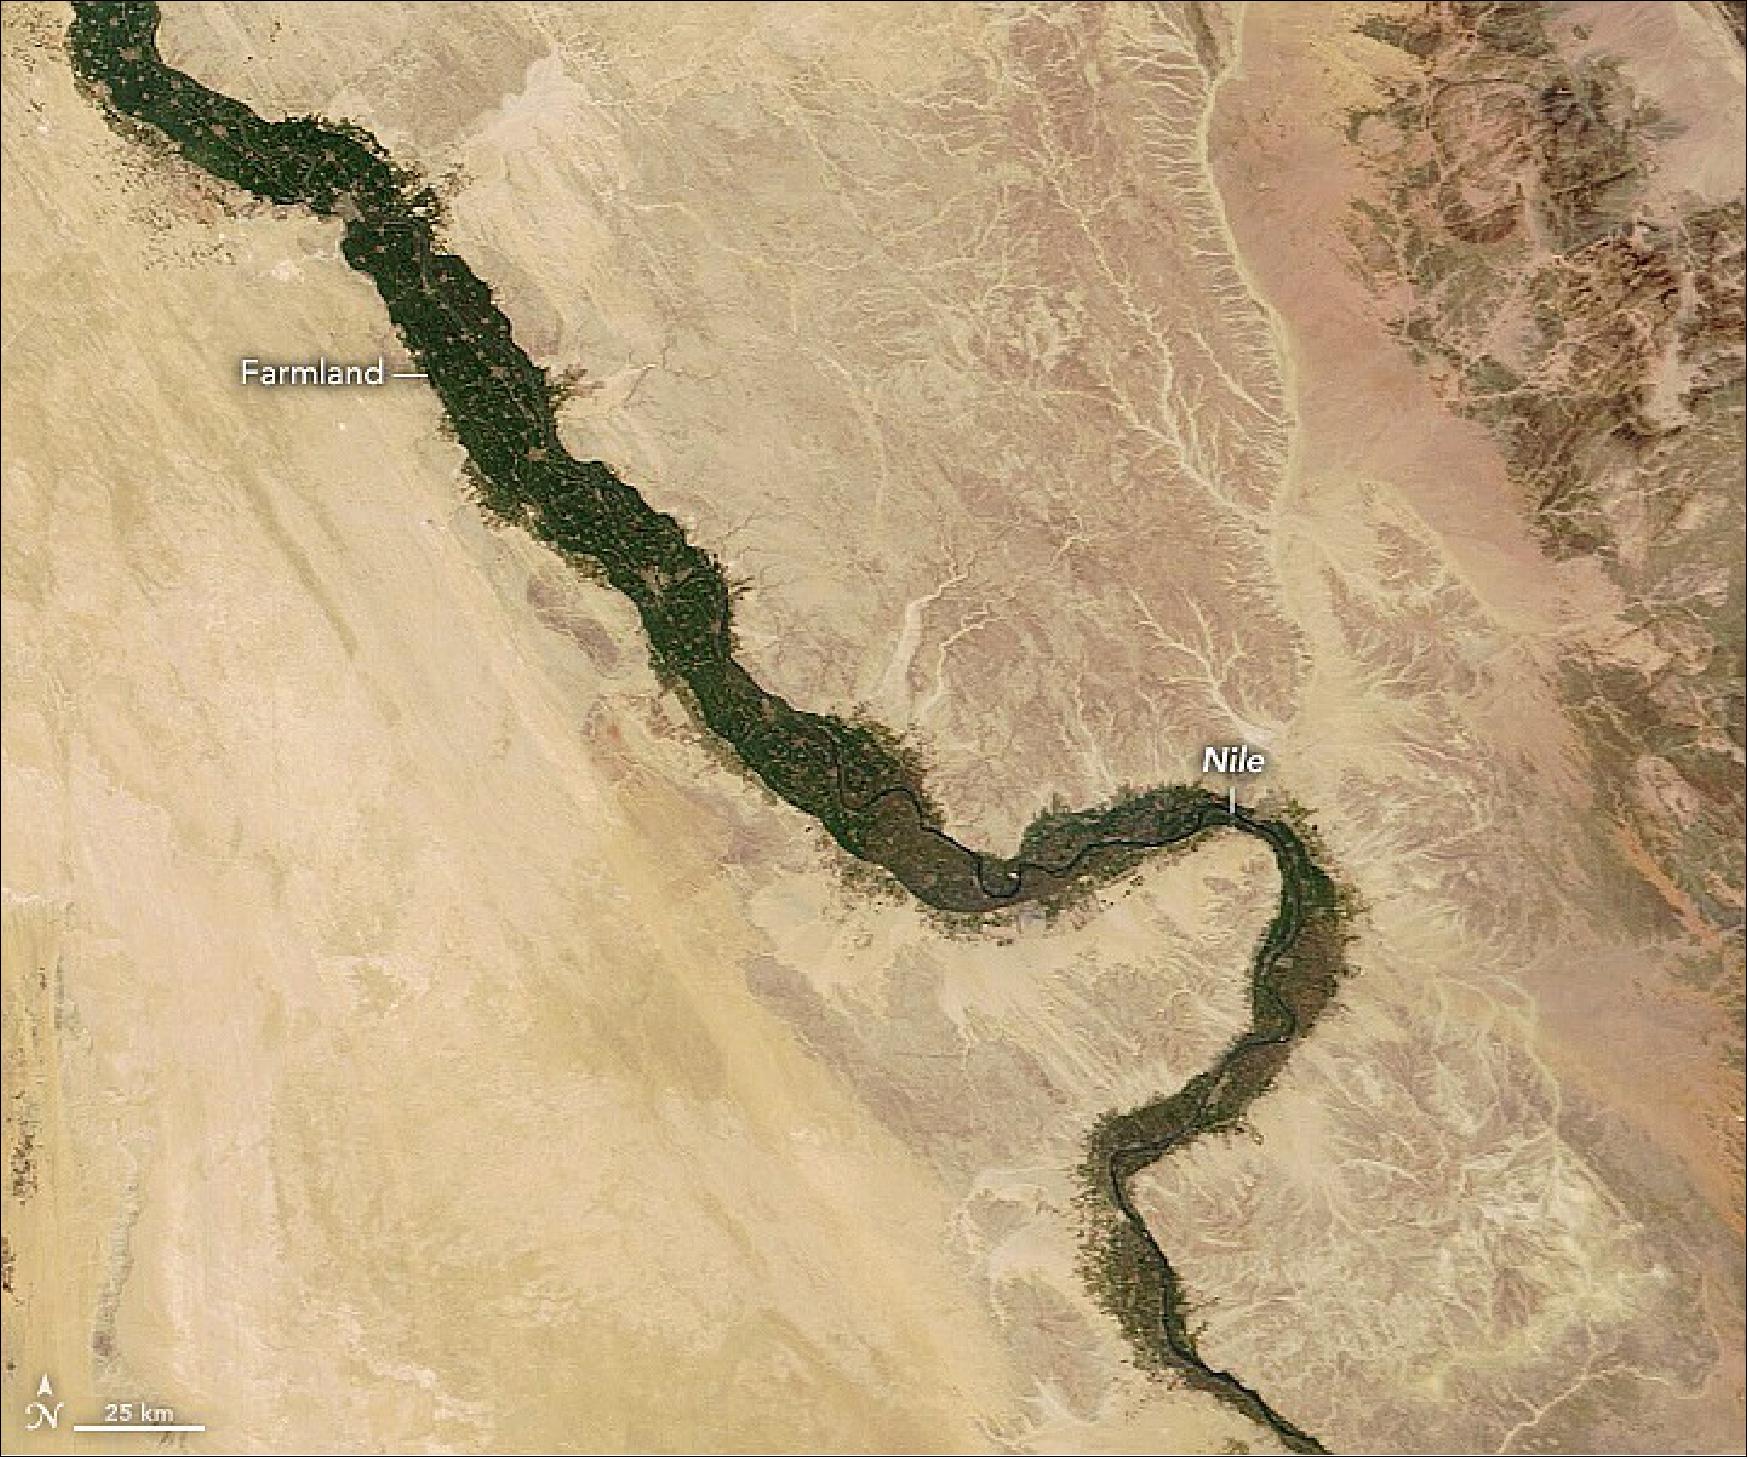 Figure 30: Aqua image of March 27 2022 showing the farmland of Egypt along the riverbanks of the Nile (image credit: NASA Earth Observatory)